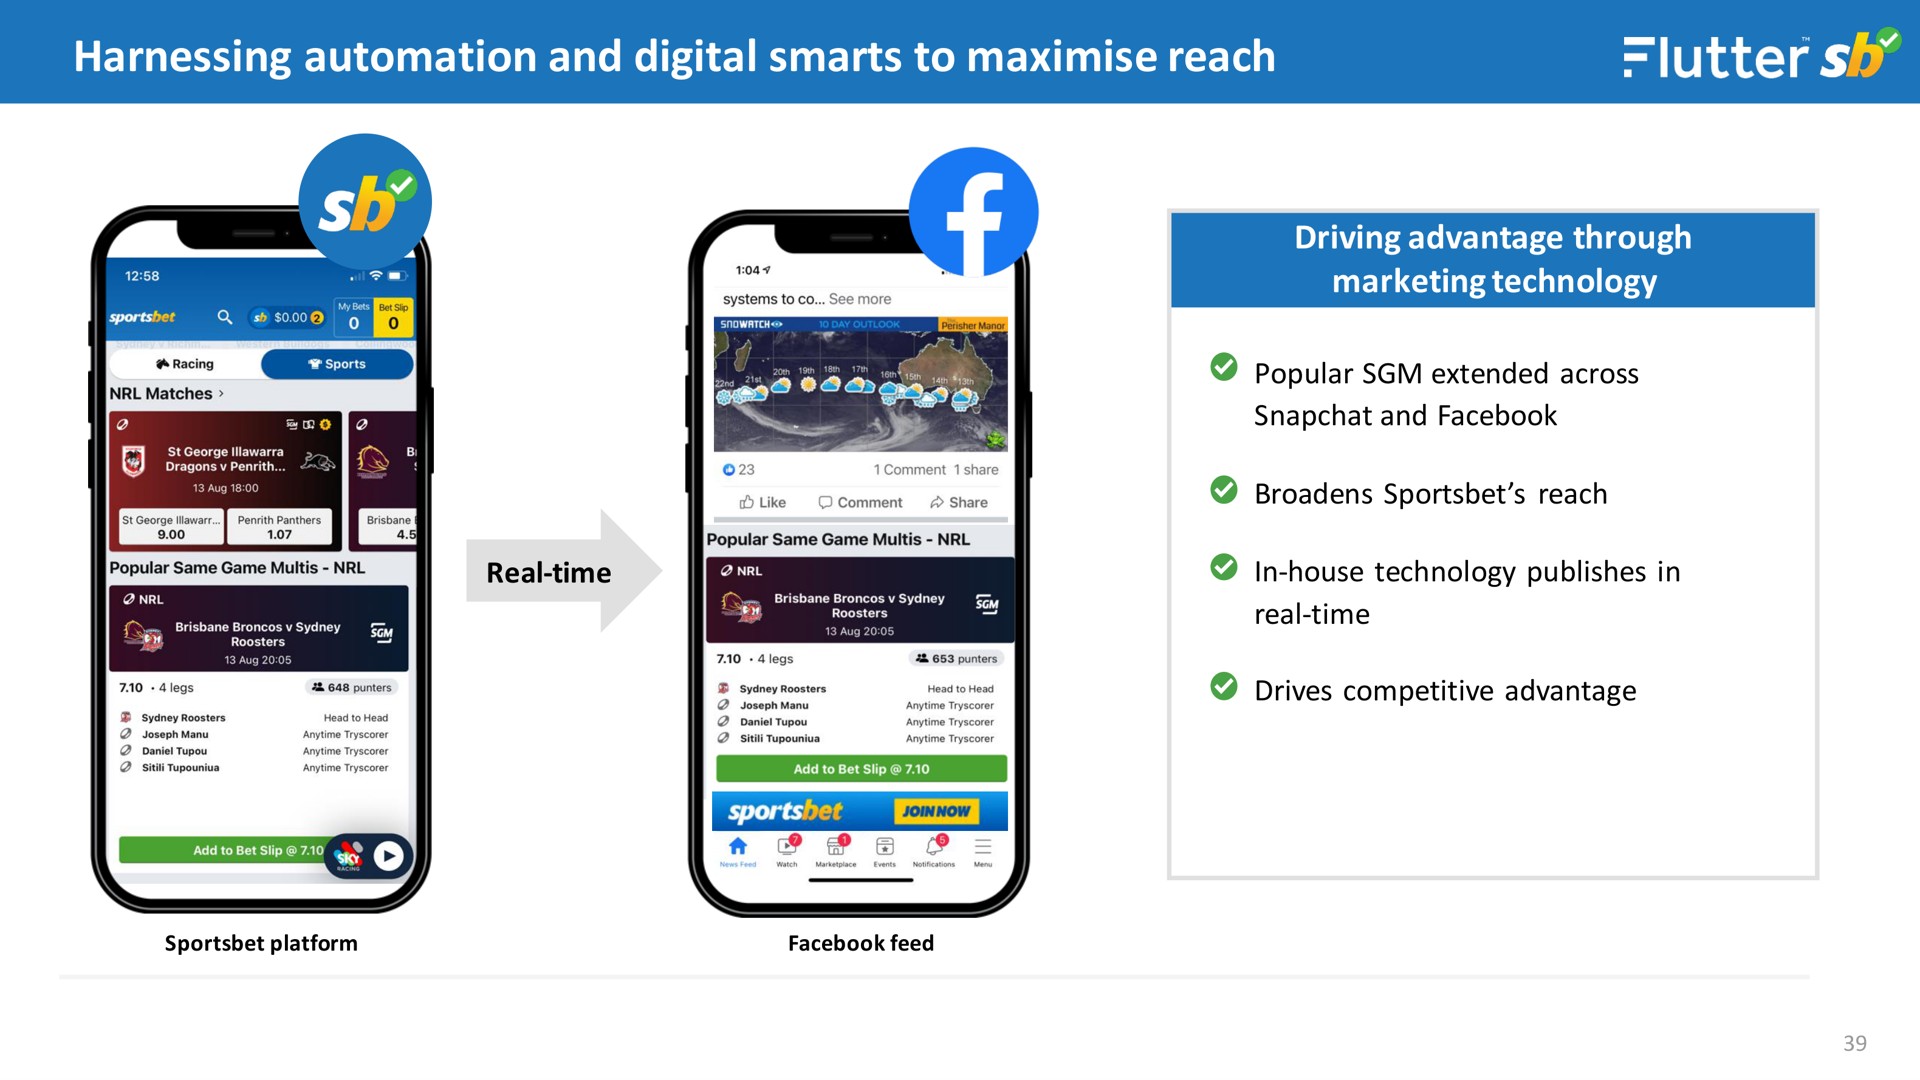 harnessing and digital smarts to reach a | Flutter